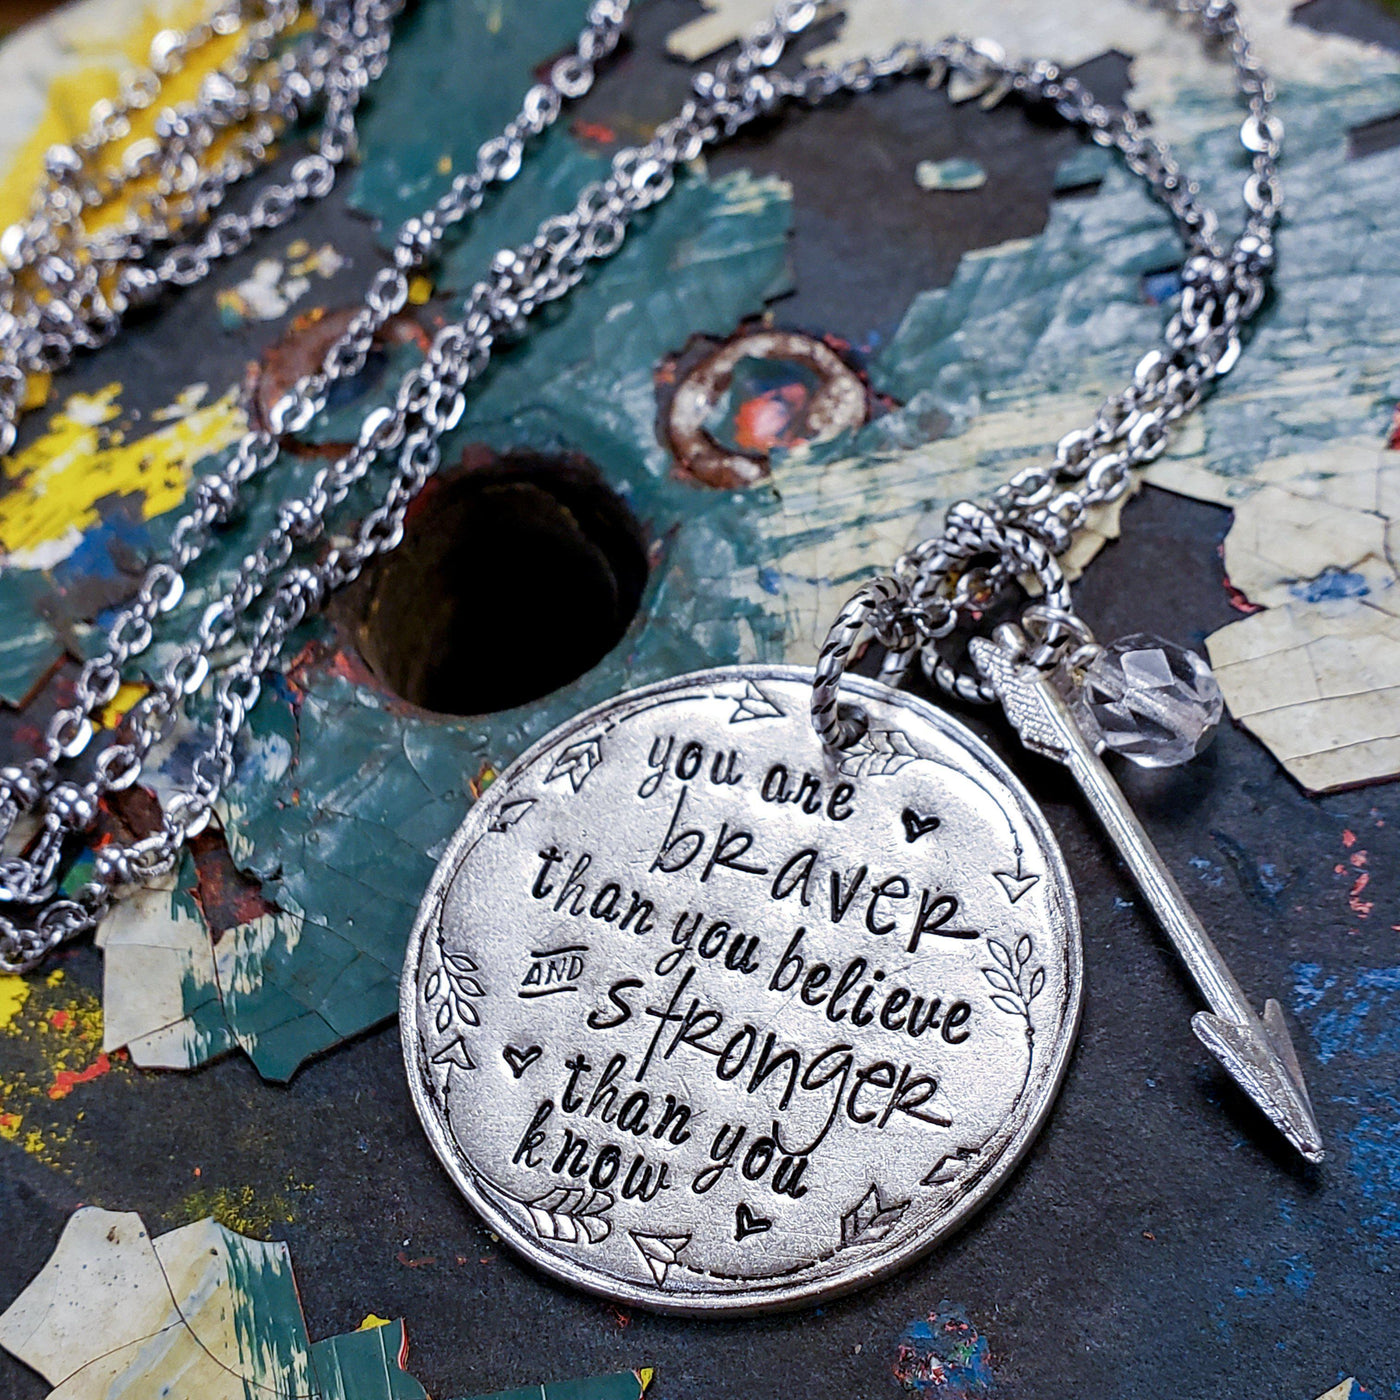 You Are Braver ... And Stronger... - Little Blue Bus Jewelry